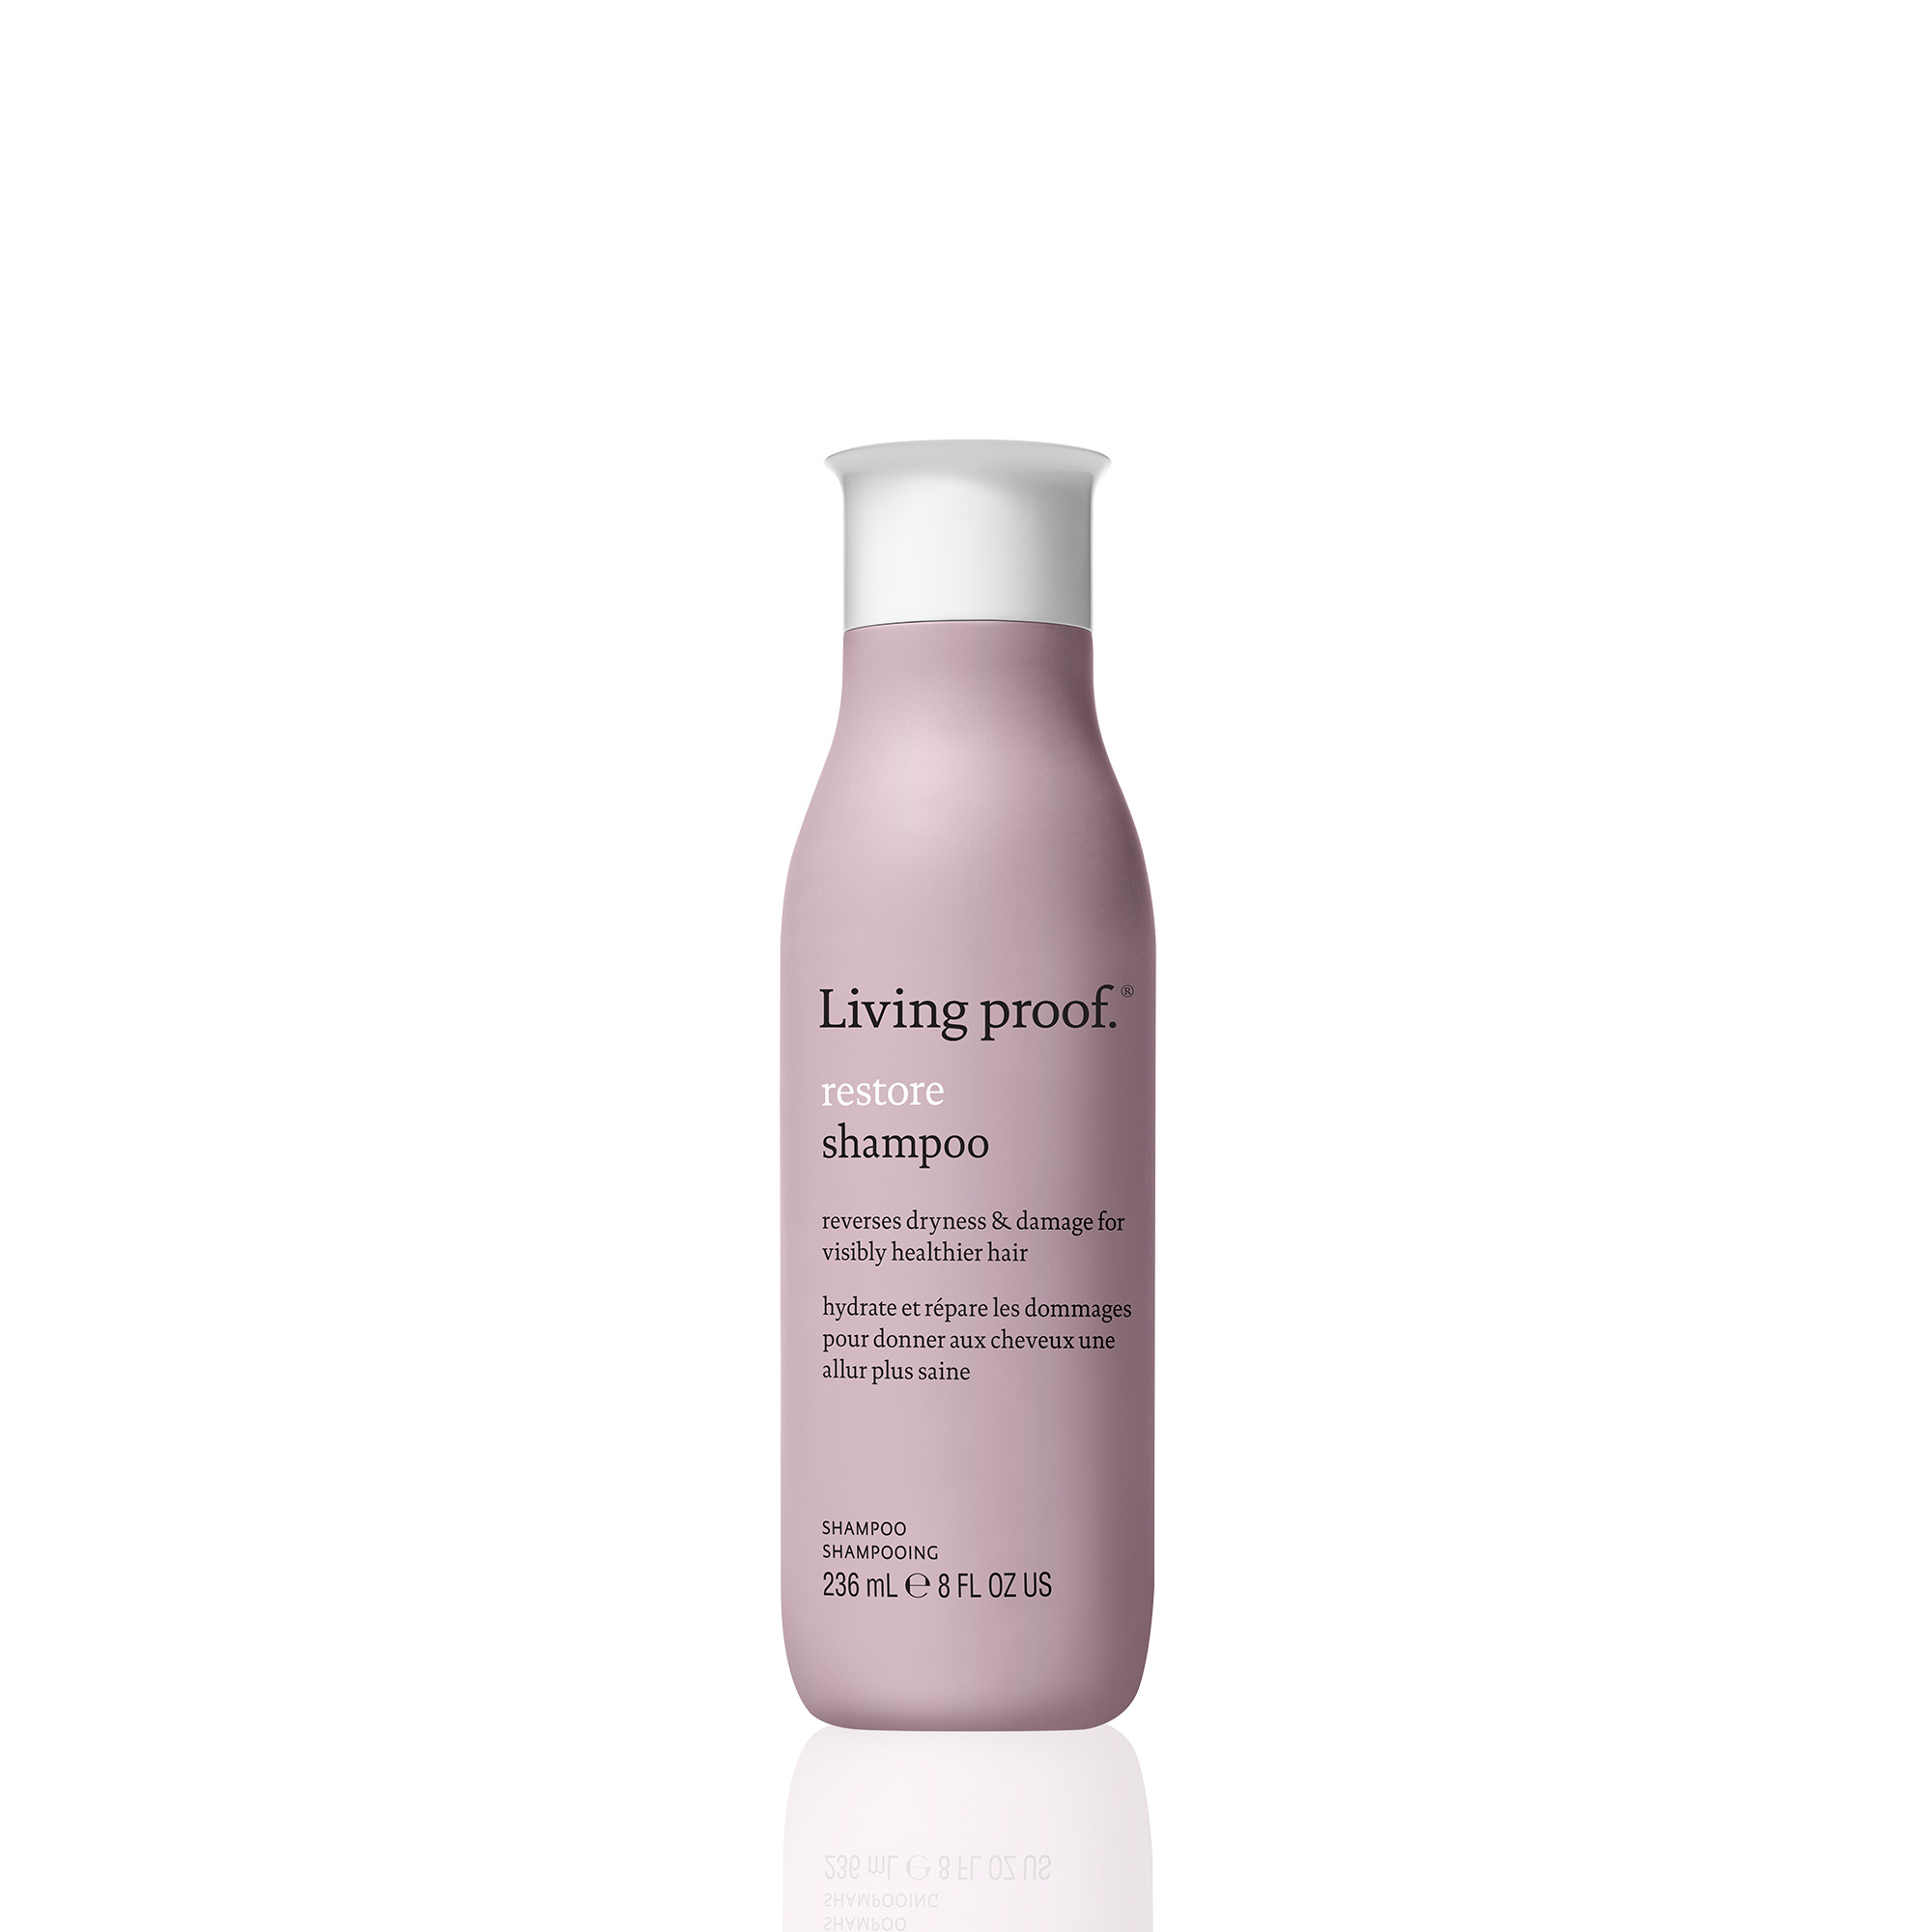 LIVING PROOF - RESTORE Shampooing